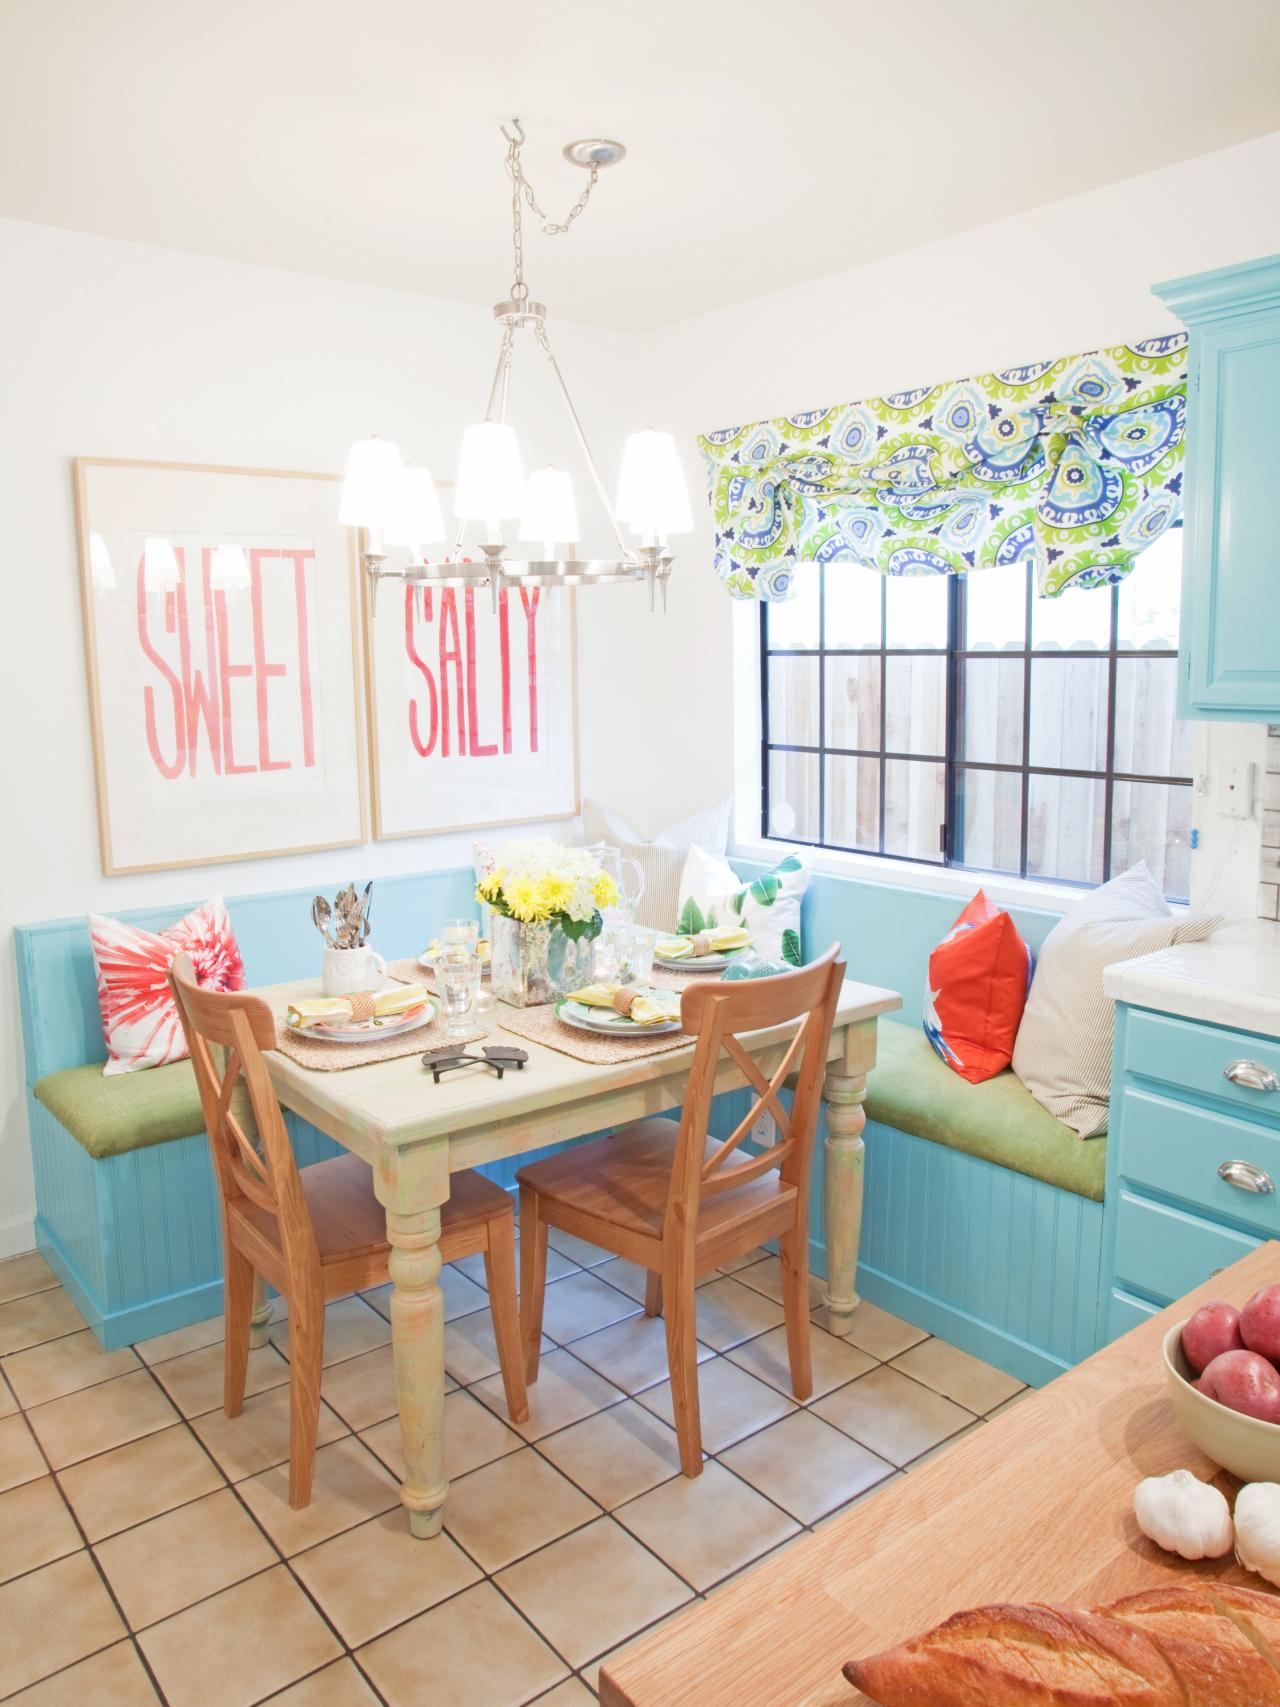 Small Kitchen Table Options: Pictures & Ideas From HGTV | HGTV